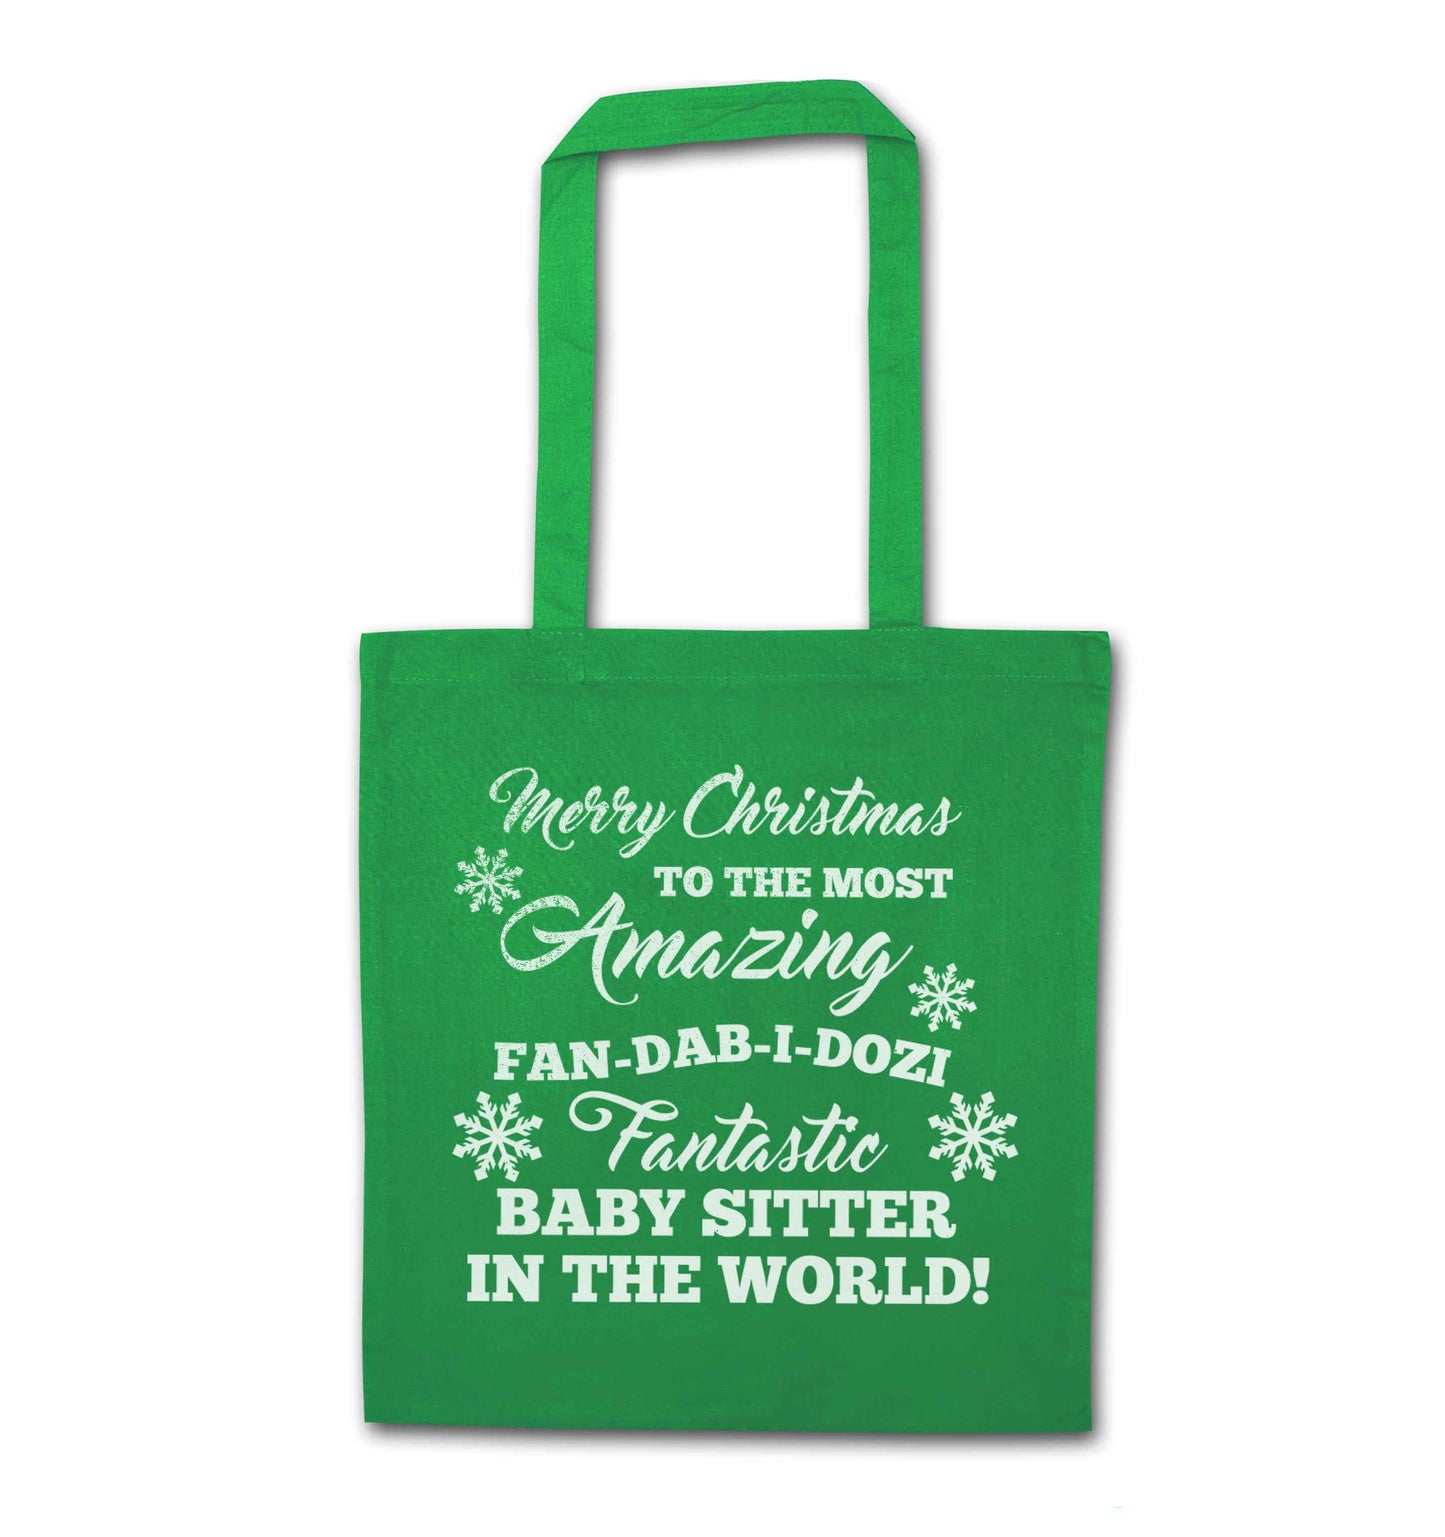 Merry Christmas to the most amazing fan-dab-i-dozi fantasic baby sitter in the world green tote bag